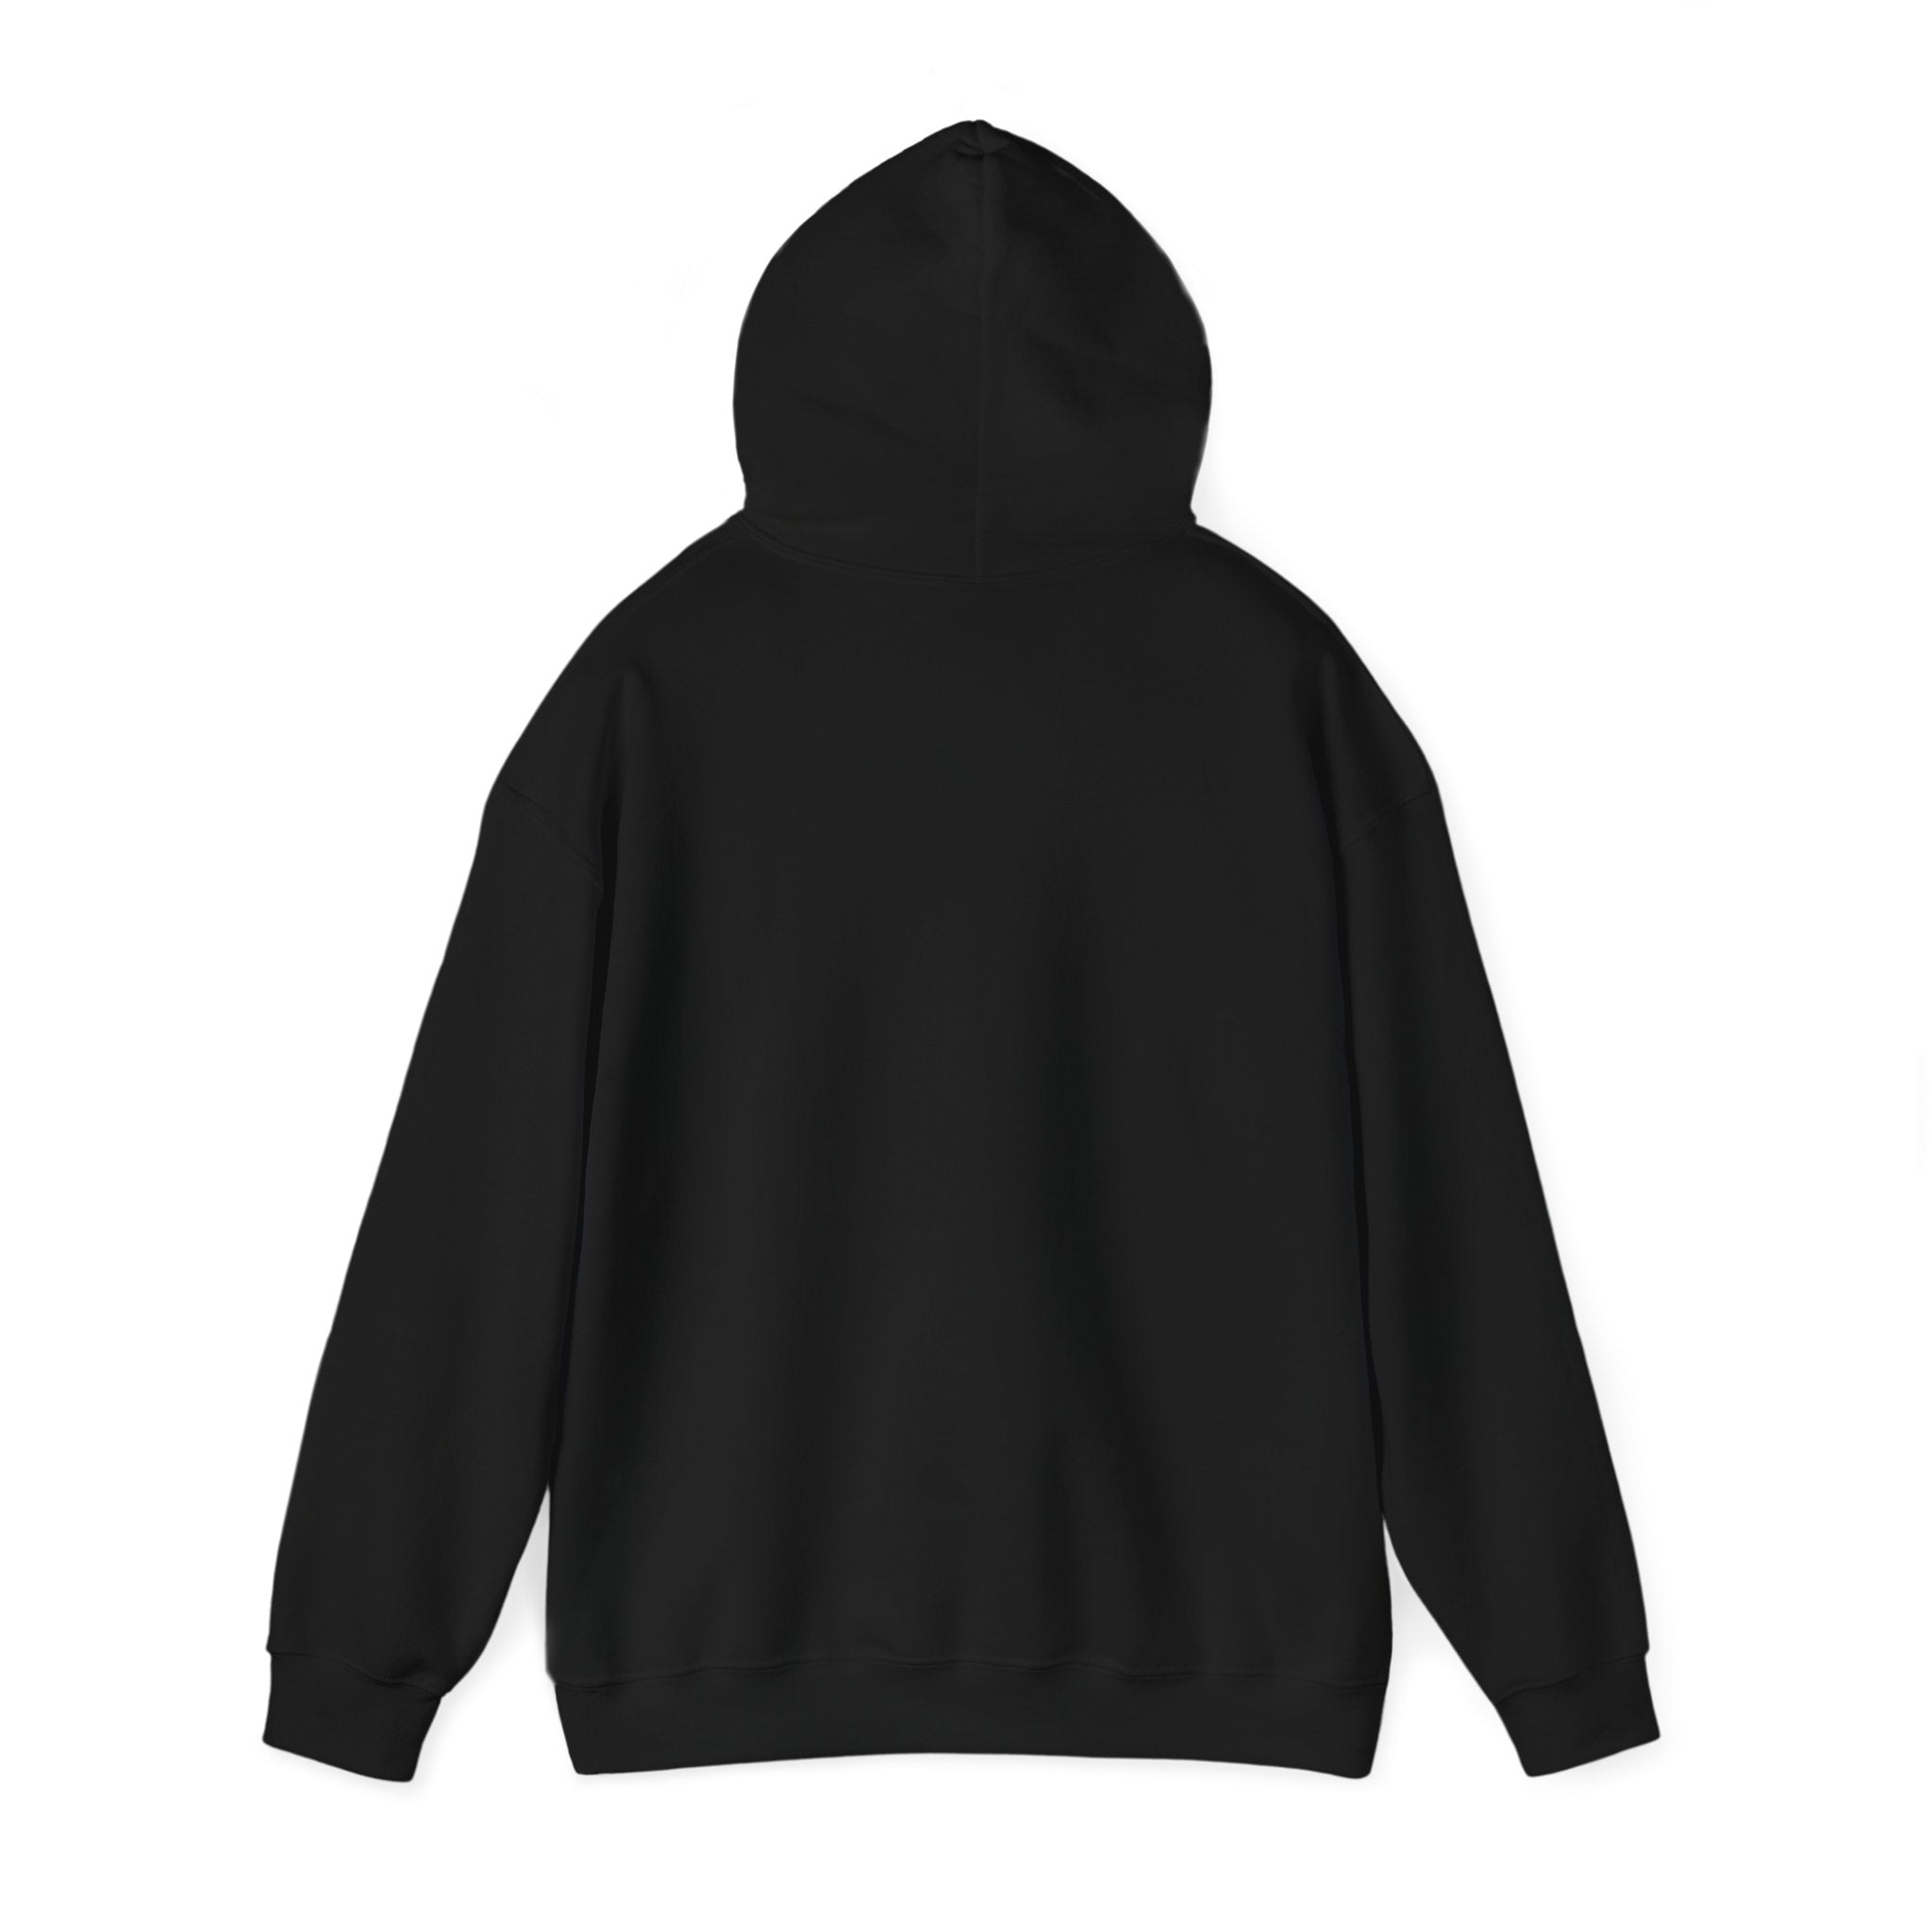 A plain black hooded sweatshirt is shown from the back, featuring a hood and long sleeves, perfect for everyday wear.